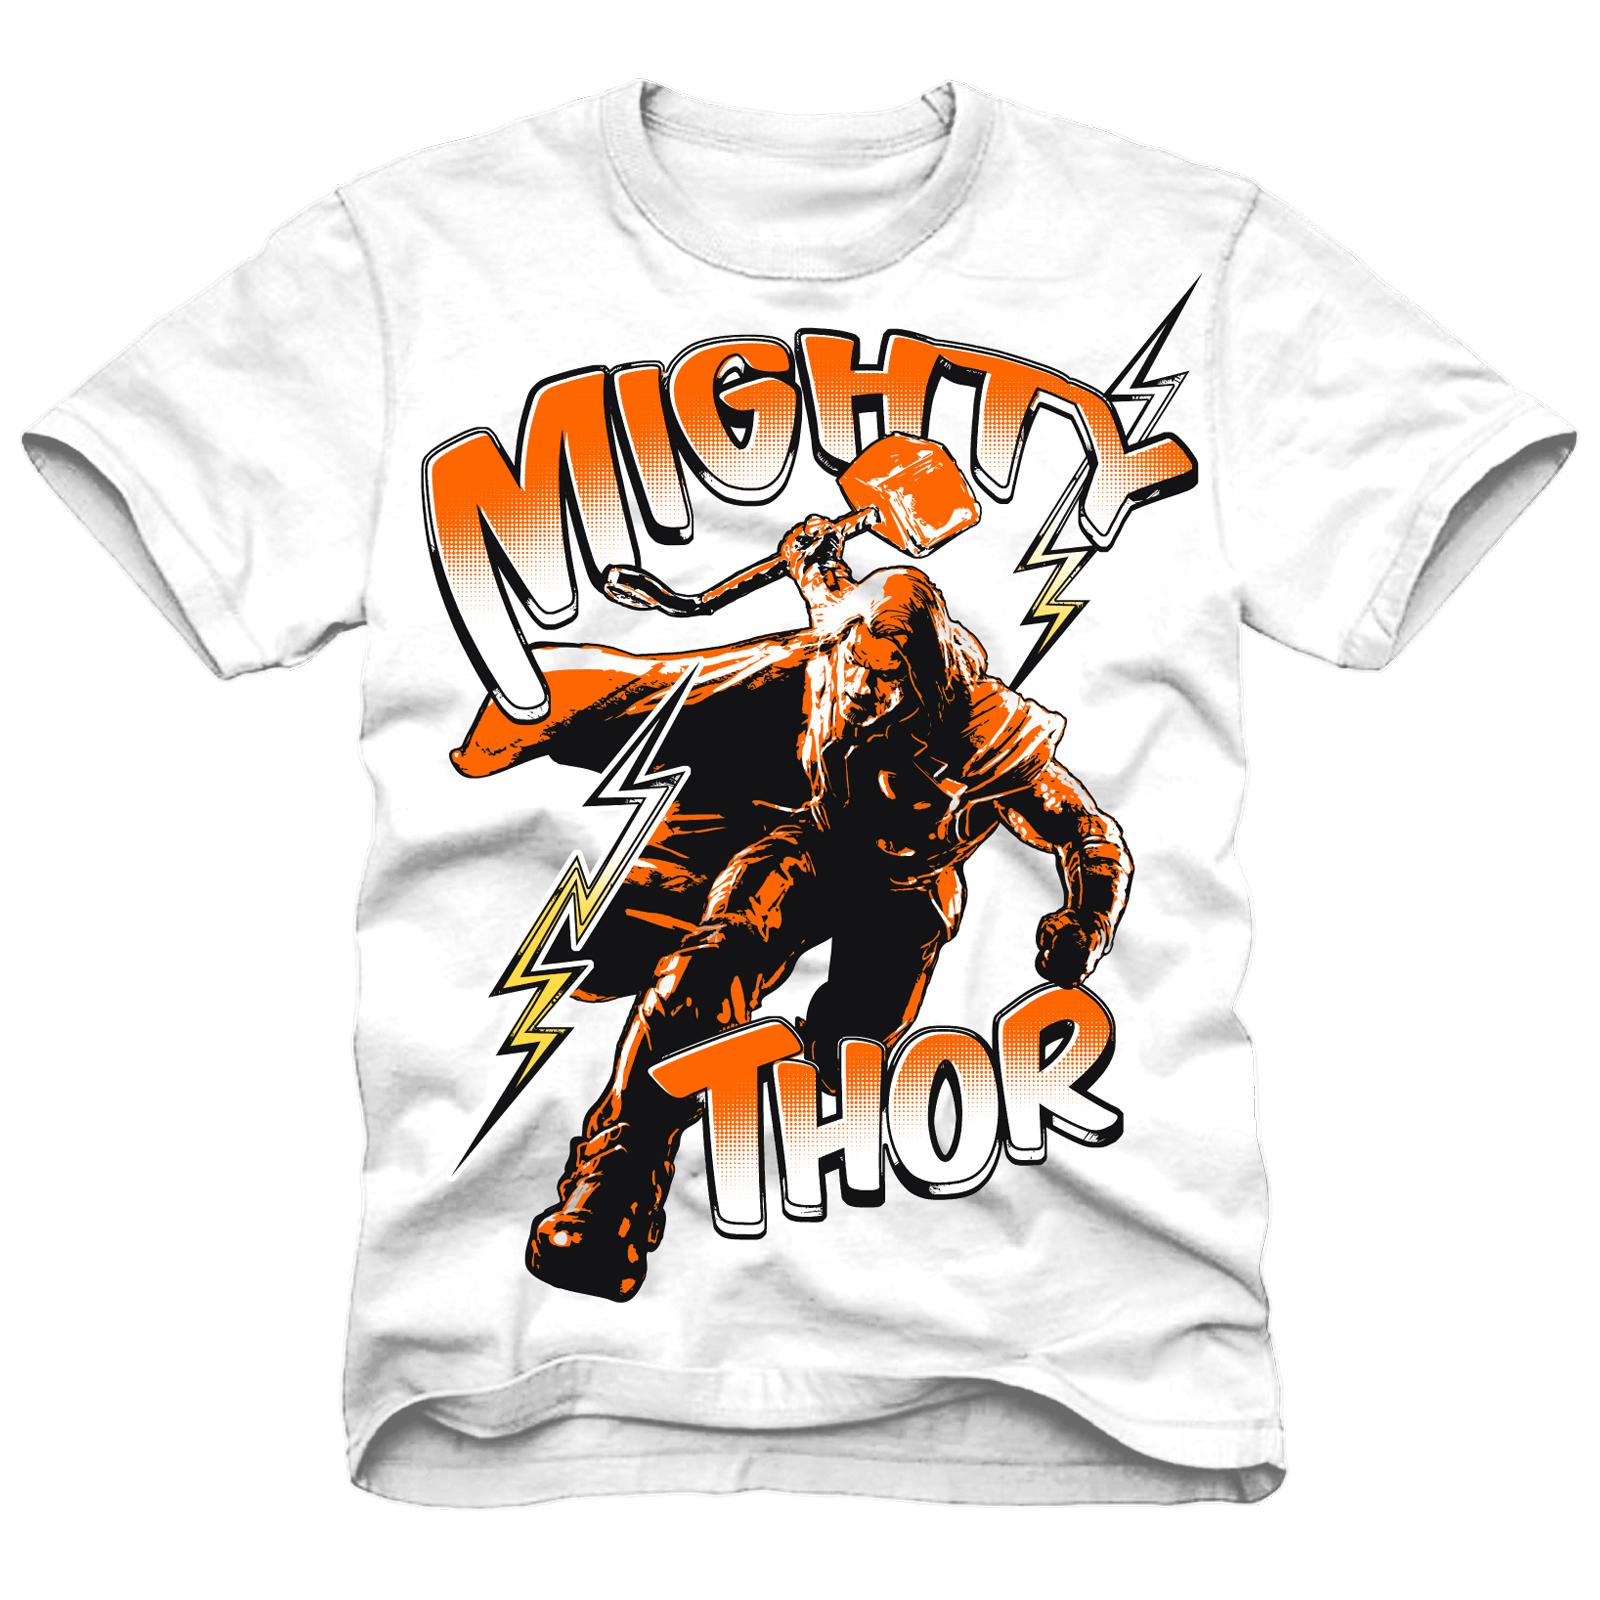 Disney Mighty Thor Boy's Graphic T-Shirt - Hammer Time